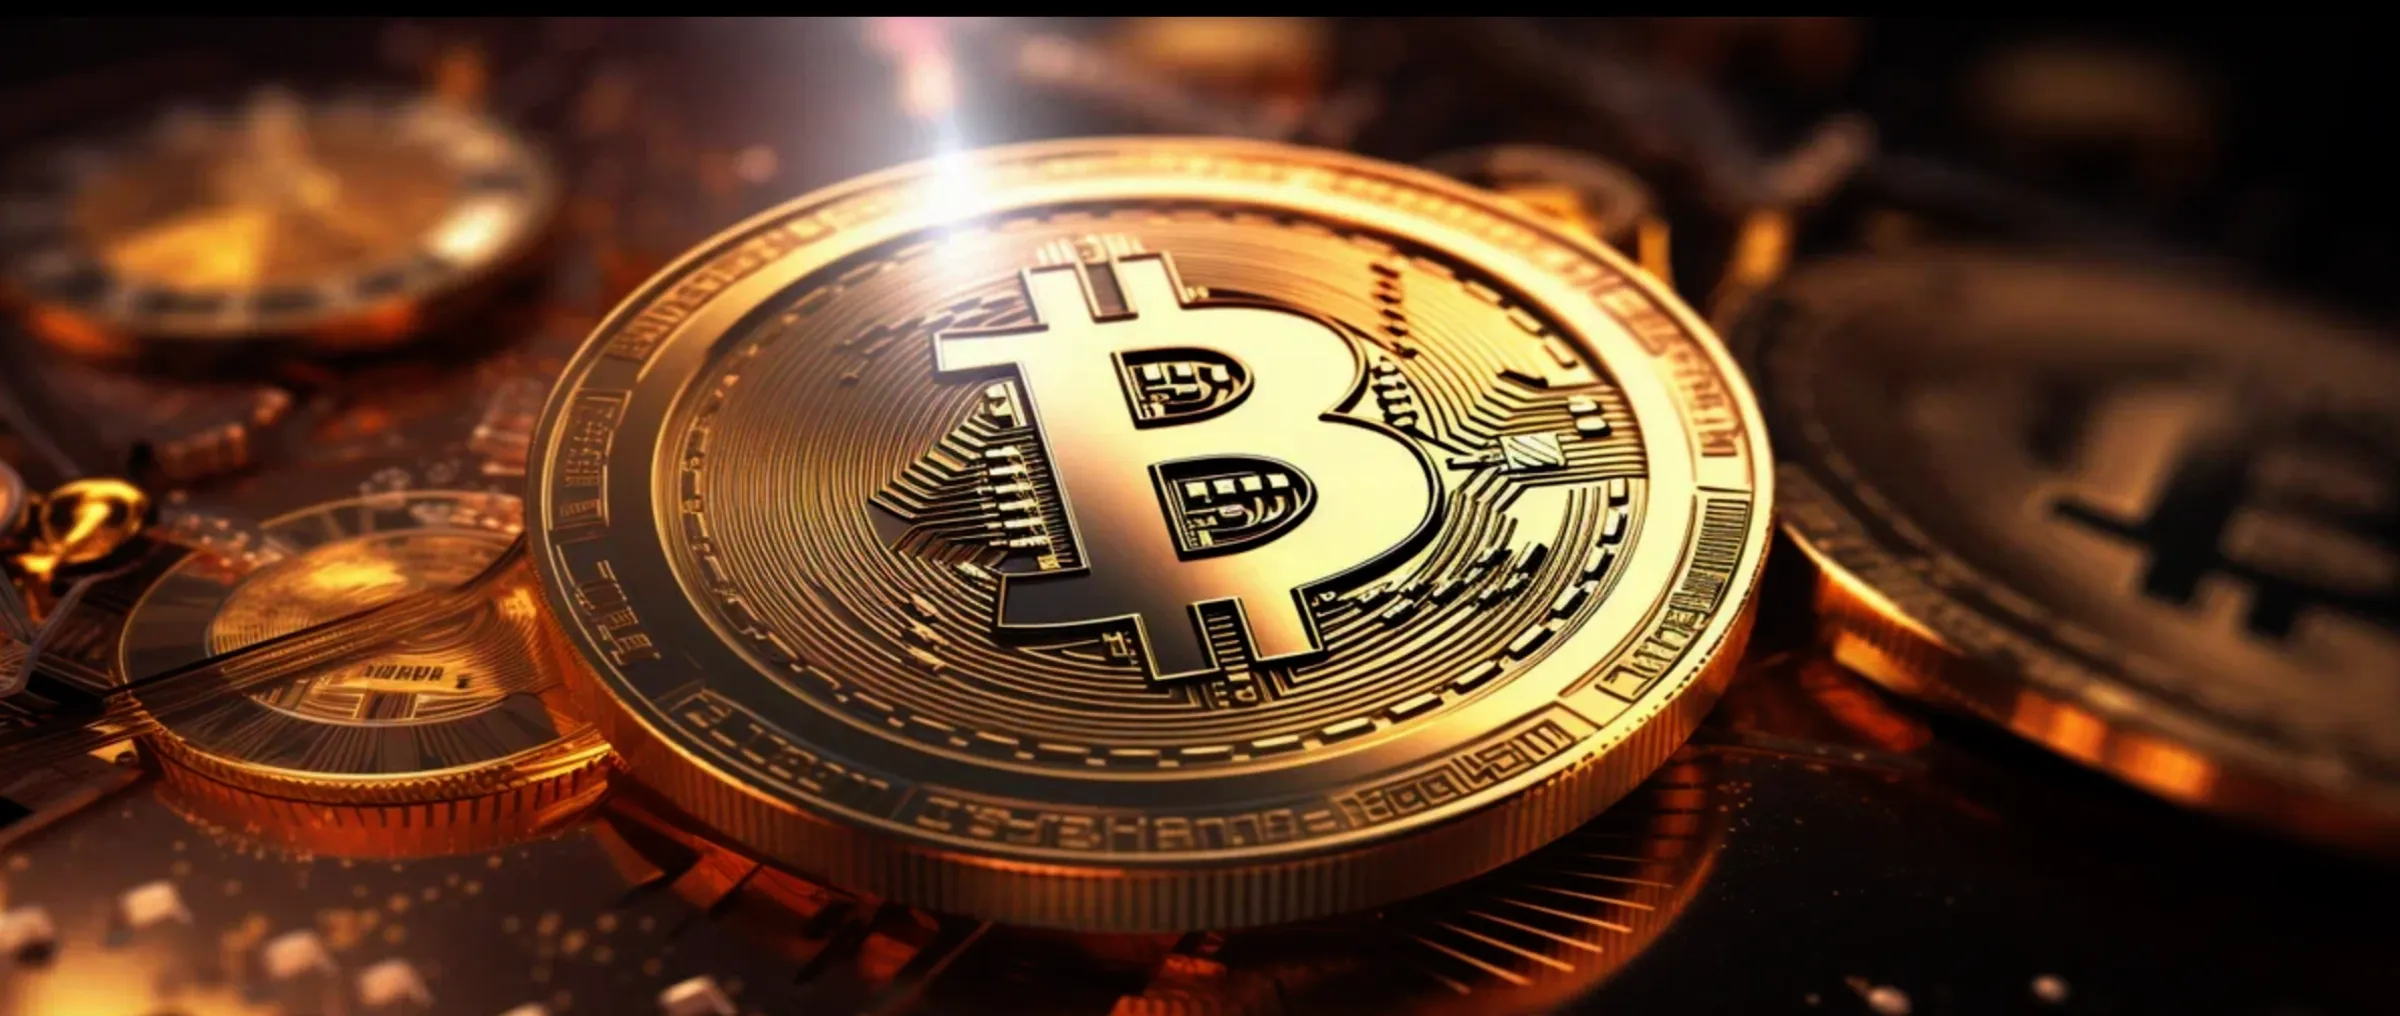 Expert opinion: The price of bitcoin will reach above $50,000 before the halving.